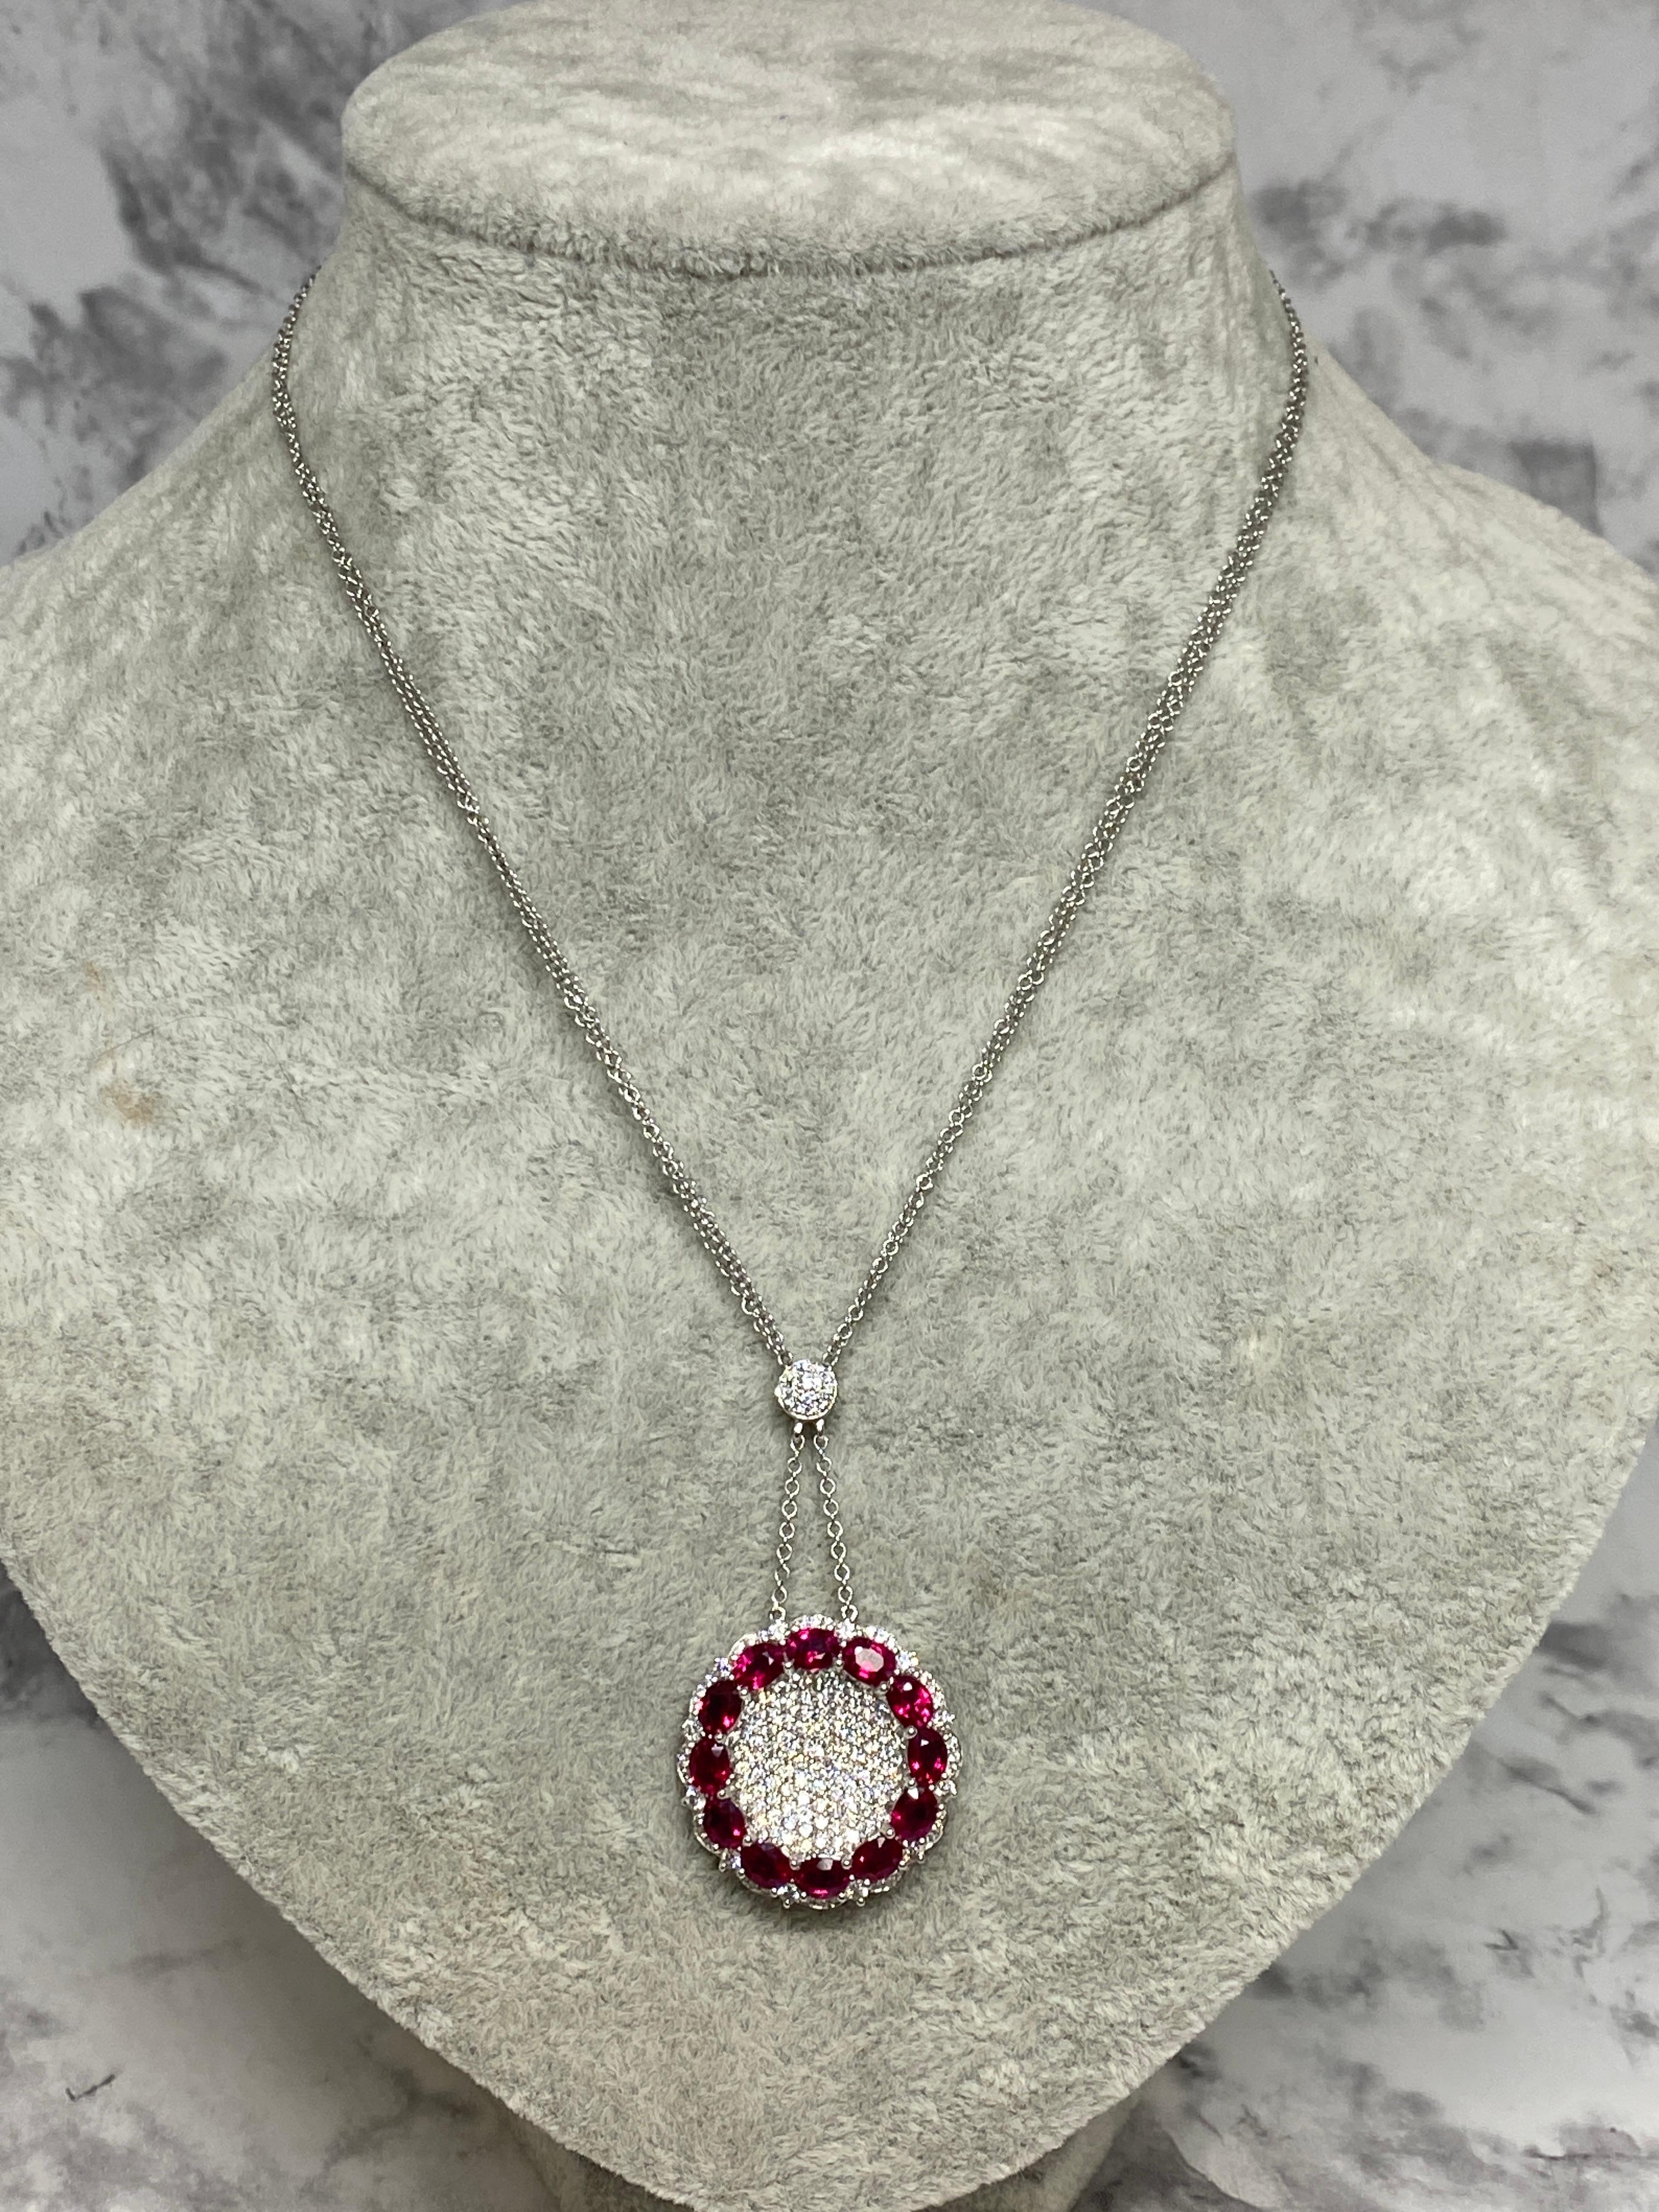 14k White Gold 5.04cttw Natural Ruby & Diamond Round Pendant Necklace  For Sale 7